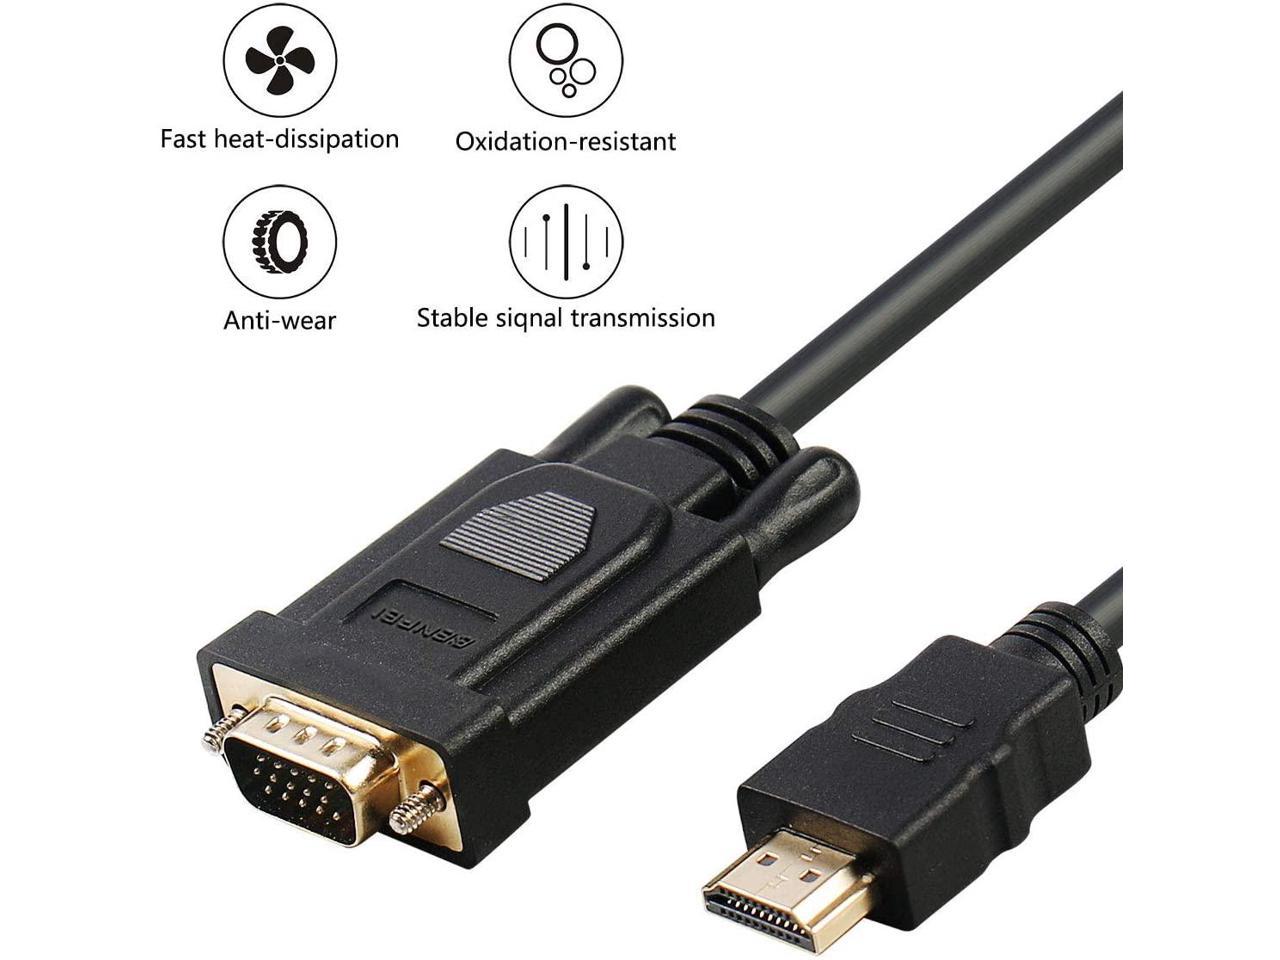 Monitor PC HDMI to VGA for Computer Male to Female HDTV Projector Raspberry Pi Xbox and More Roku 10 Pack Benfei Gold-Plated HDMI to VGA Adapter Desktop Laptop Black Chromebook 